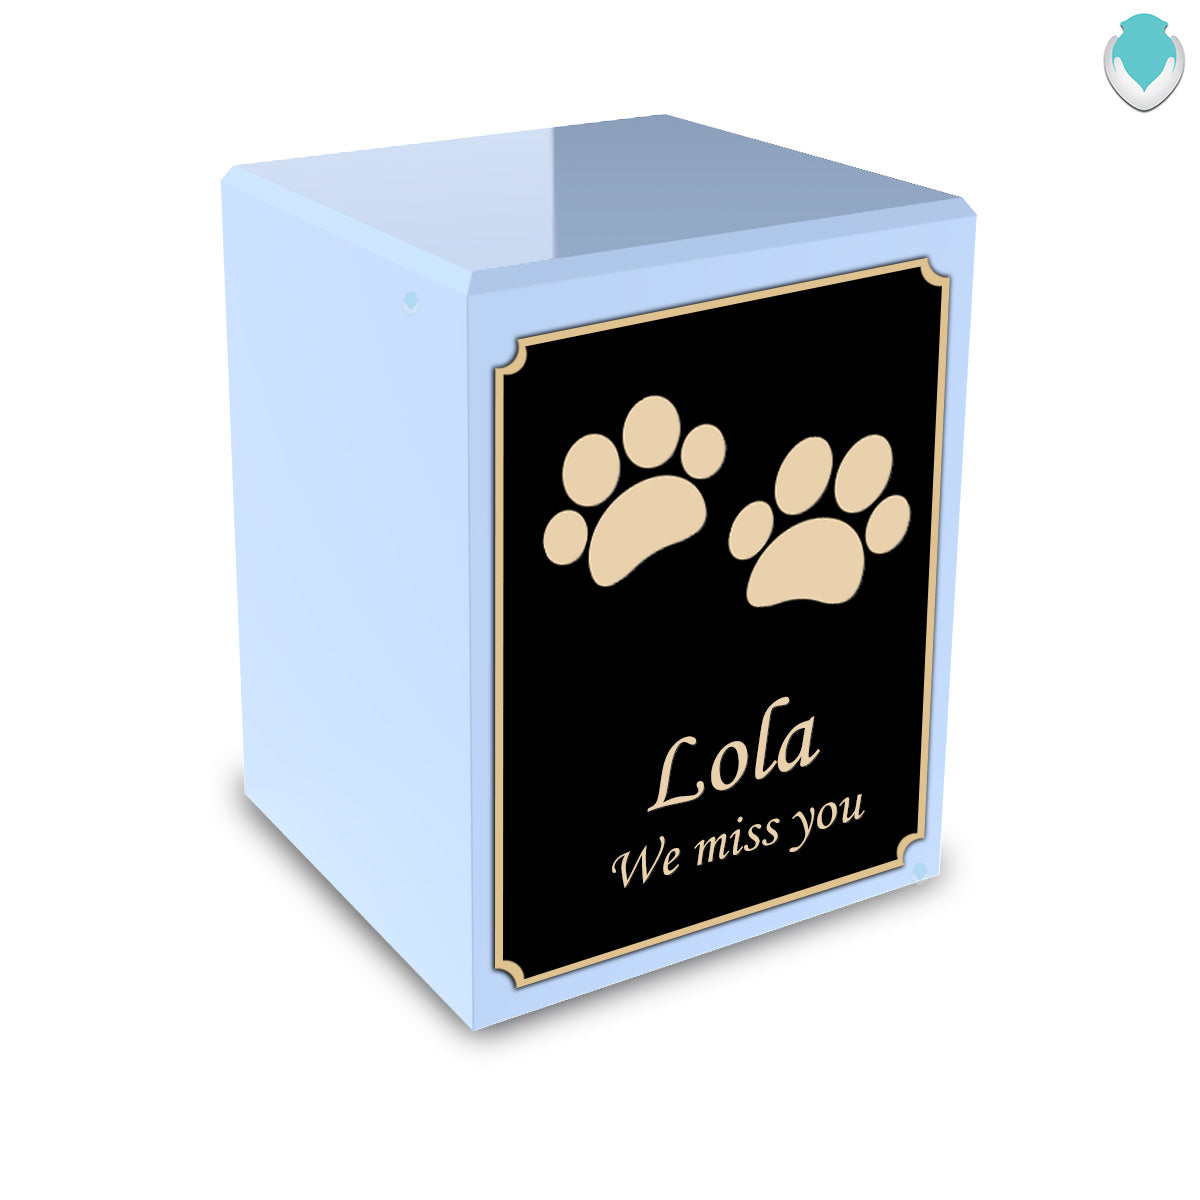 Custom Engraved Heritage Light Blue Colored Walking Paws Printed Small Pet Cremation Urn Memorial Box for Ashes